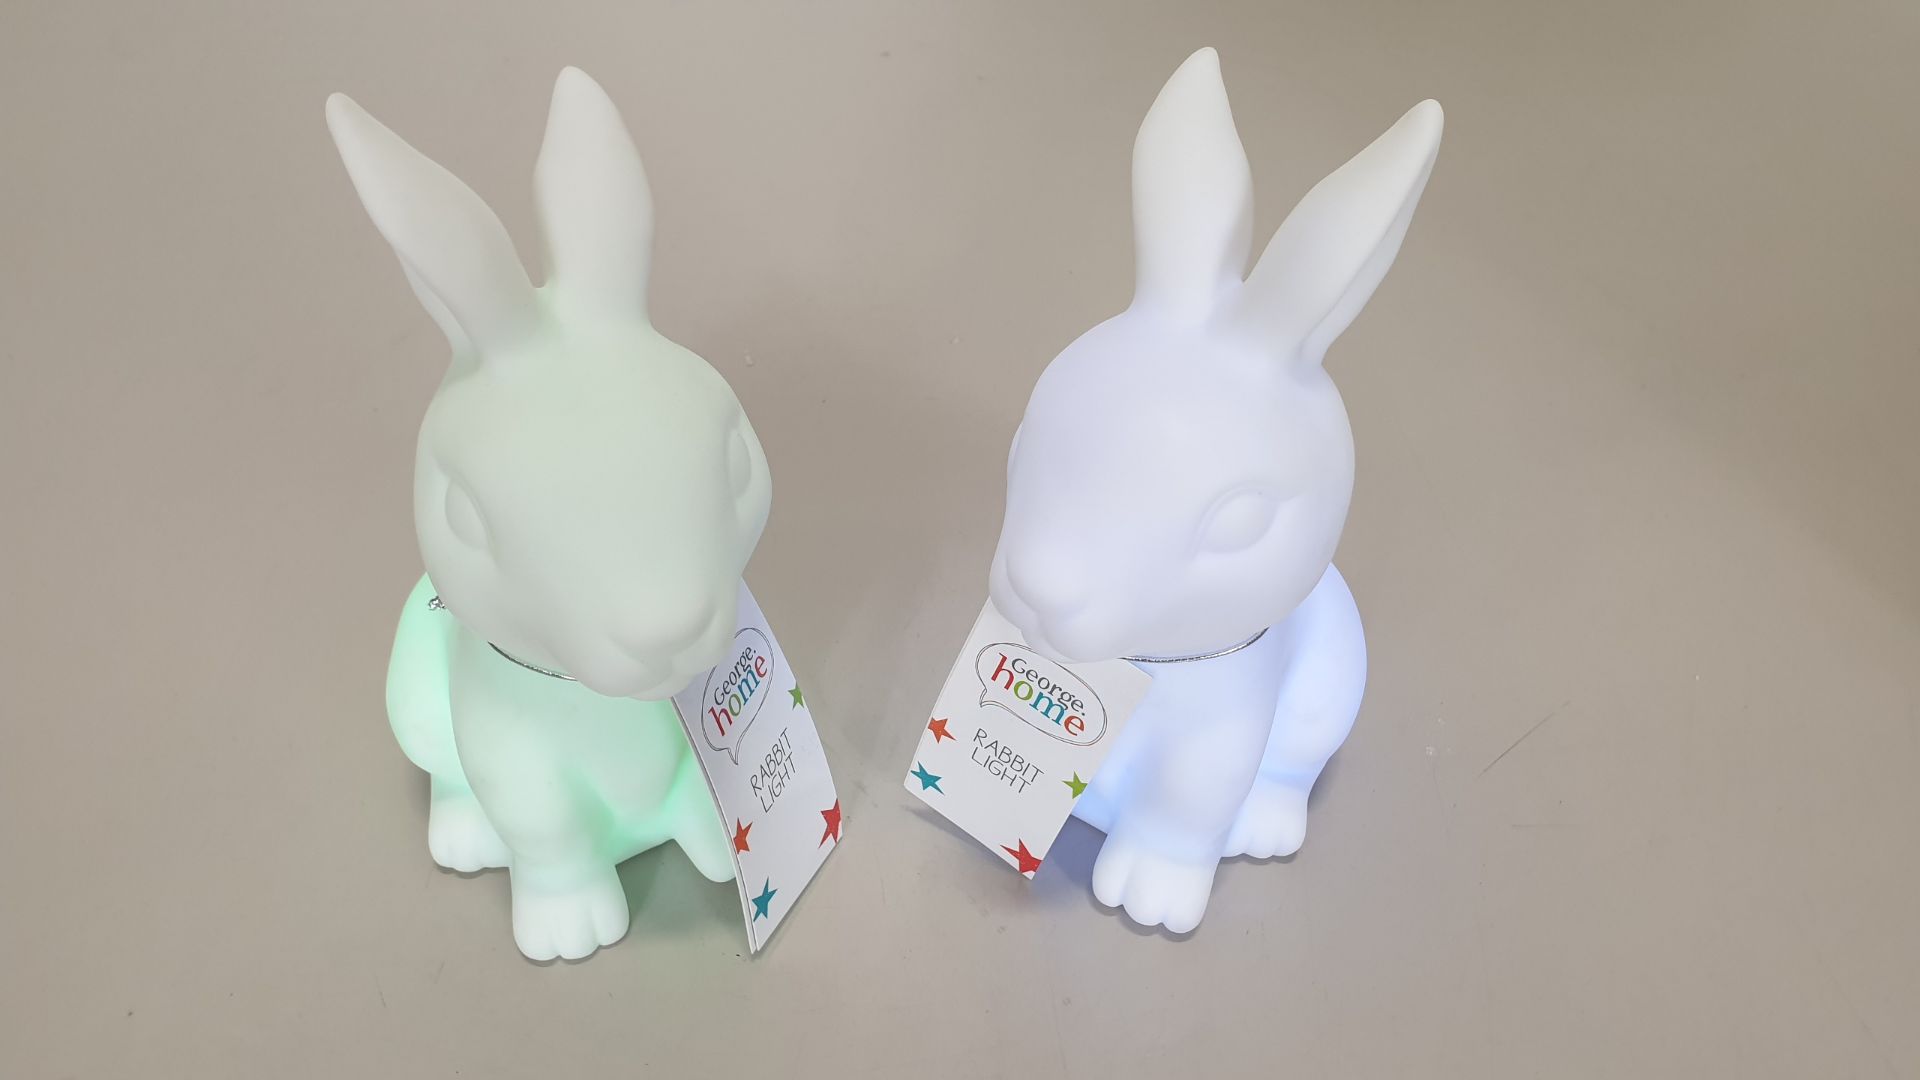 34 X GEORGE HOME RABBIT LIGHTS (COLOUR CHANGING) IN 17 INNER CARTONS (TOTAL RRP £330)